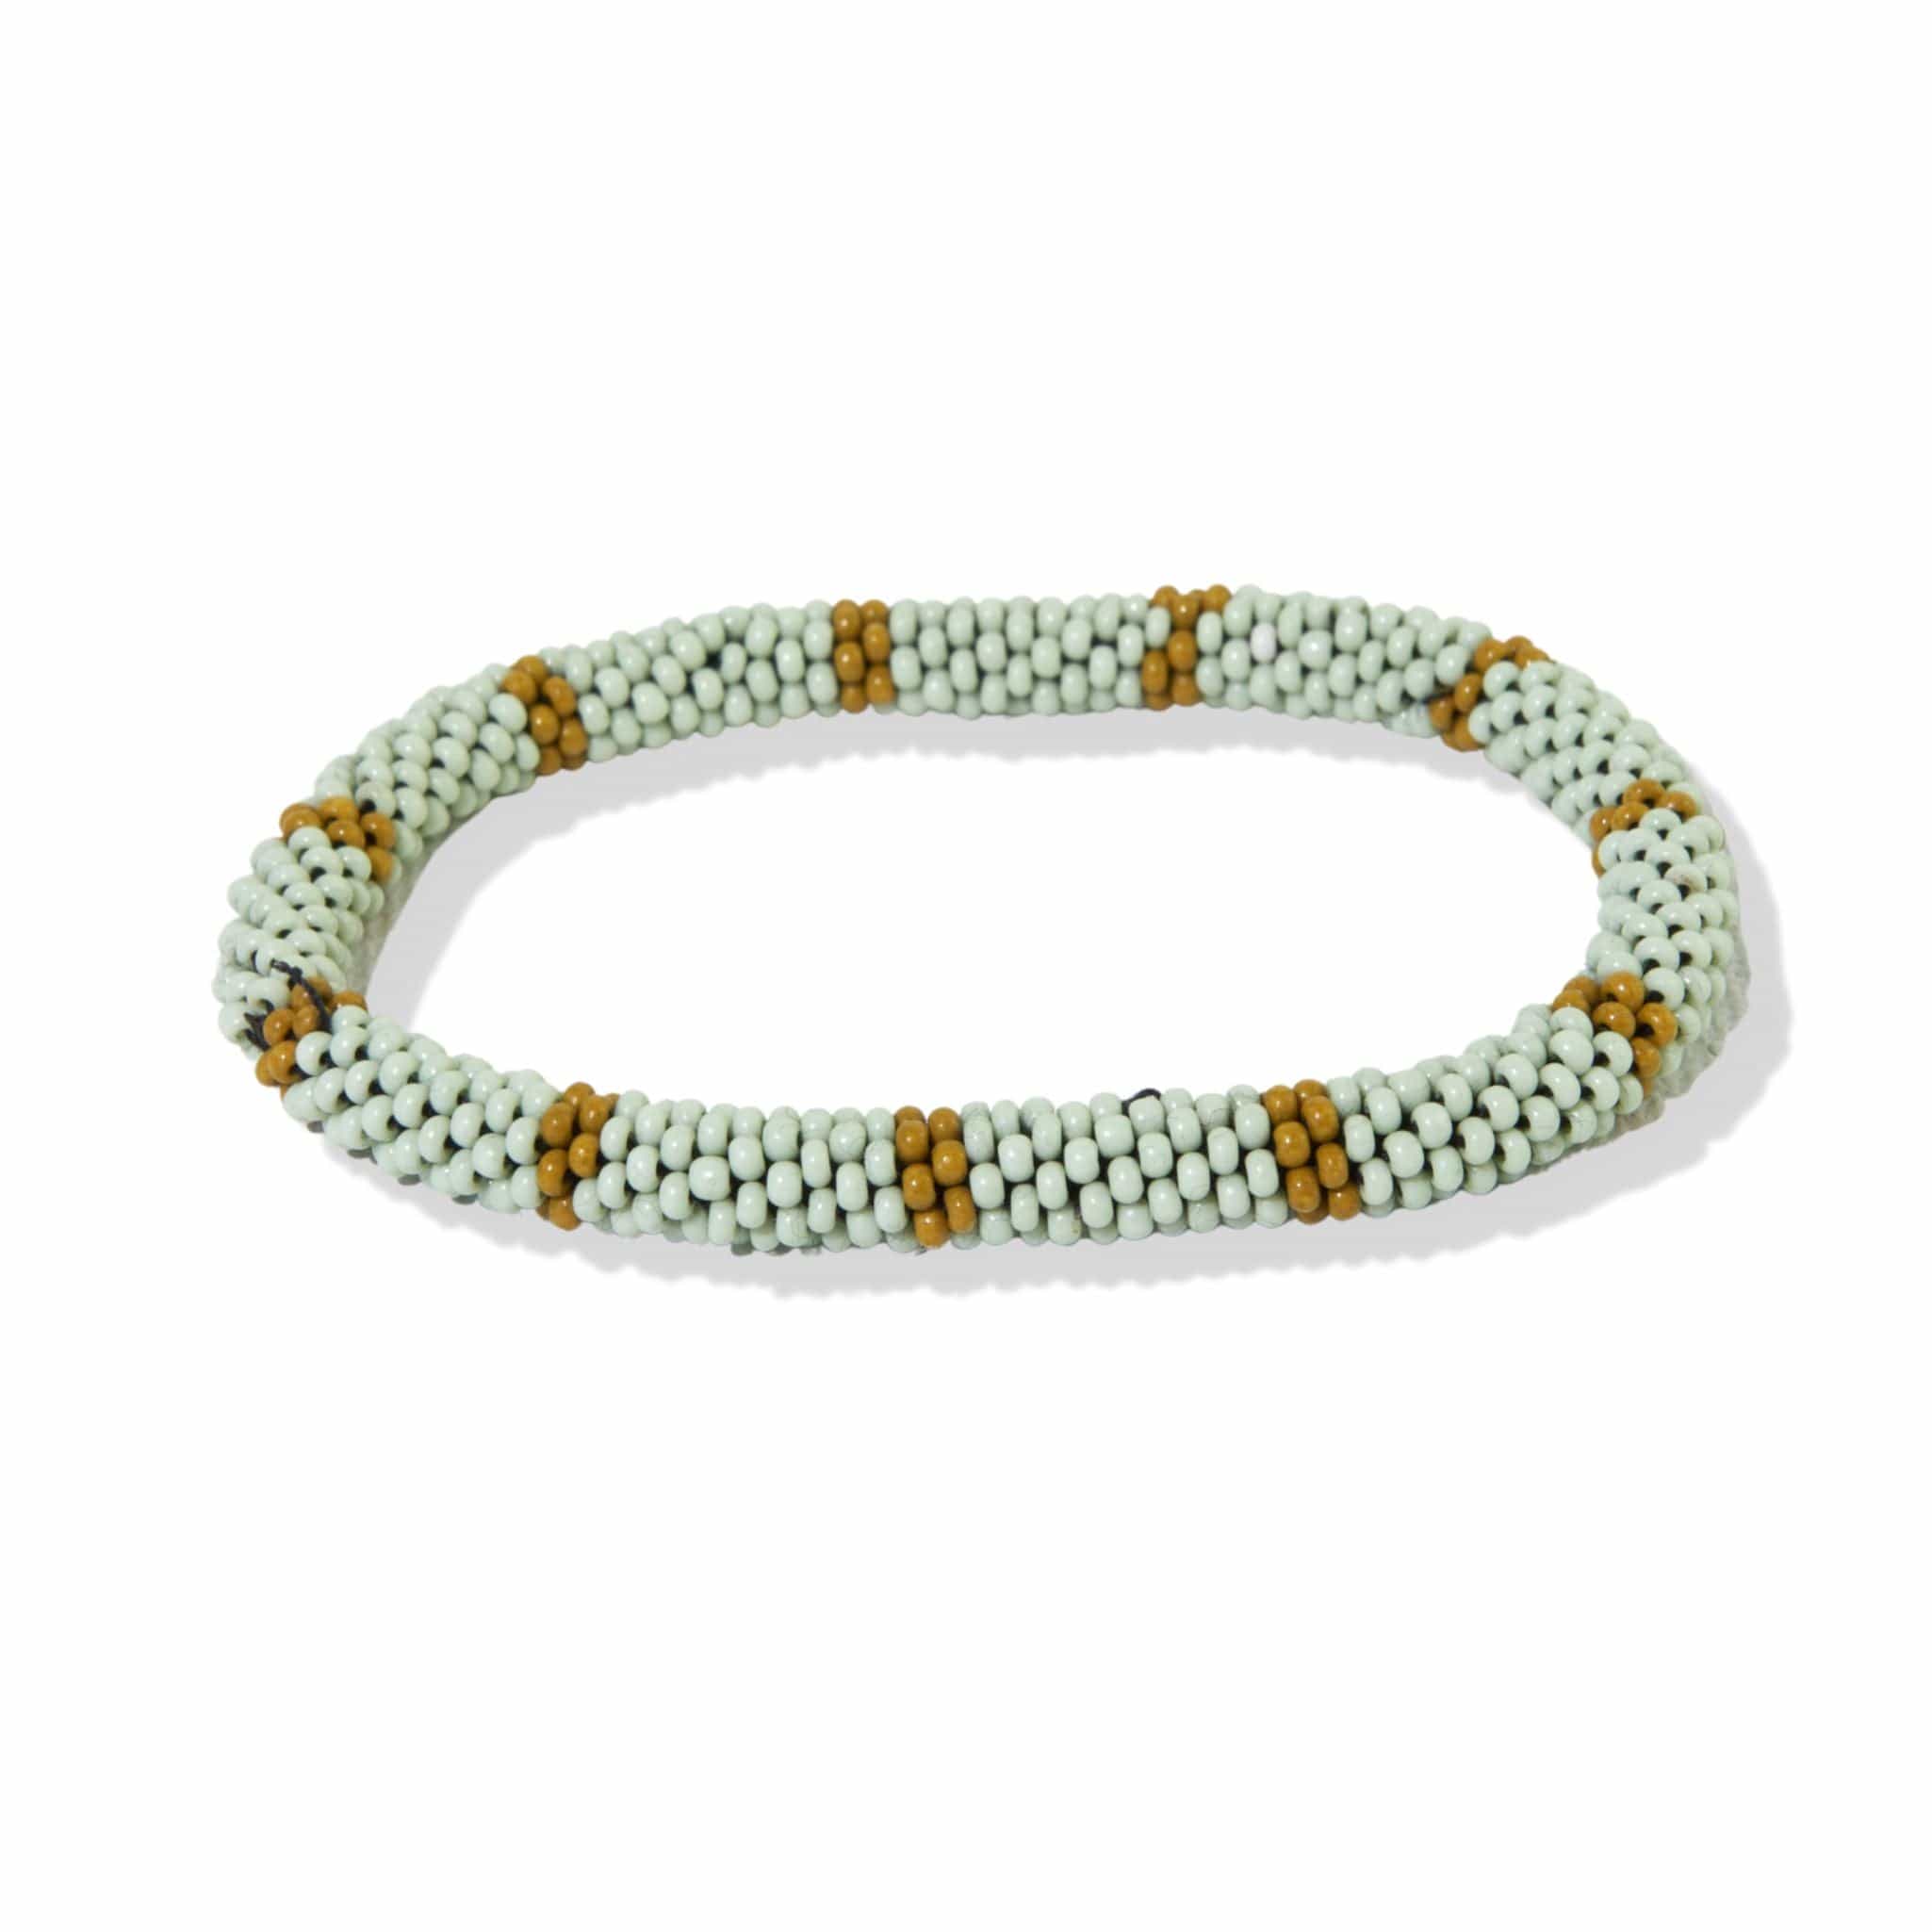 Mint and Citron Stripe Slide and Stack Bracelet by INK+ALLOY